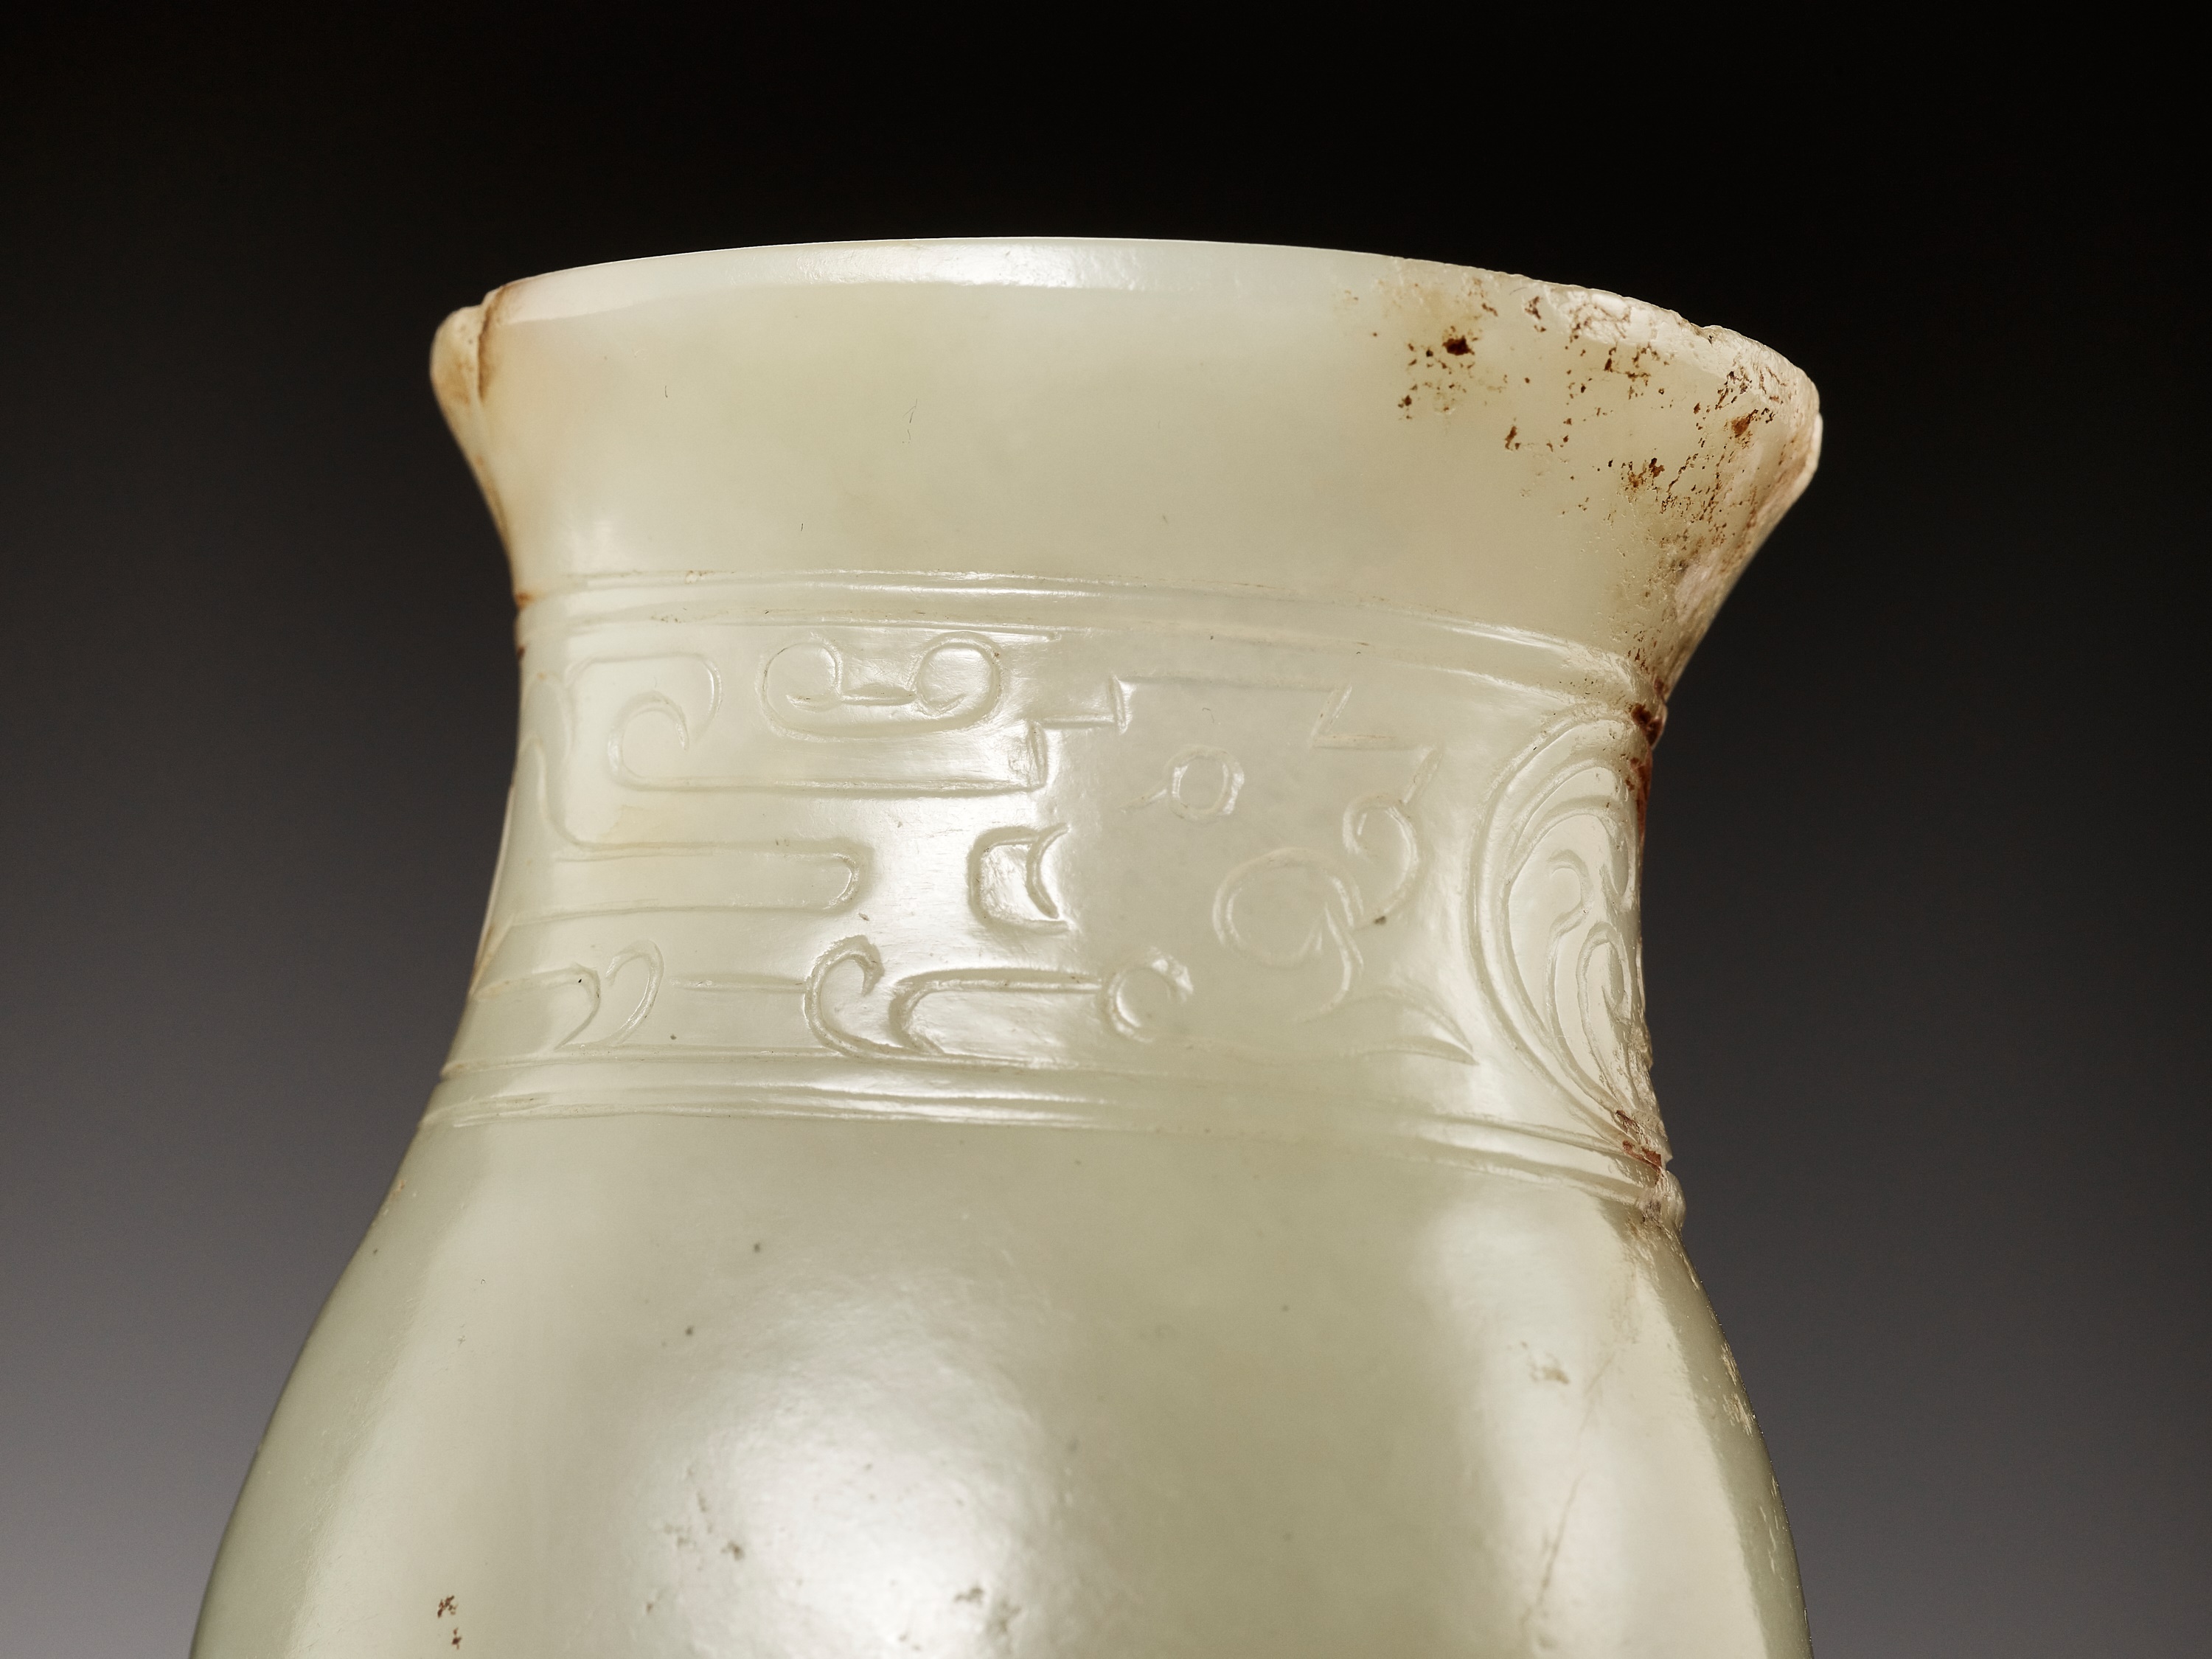 A RARE ARCHAISTIC 'SHANG BRONZE IMITATION' JADE VESSEL, ZHI, LATE SONG TO EARLY MING DYNASTY - Image 5 of 19